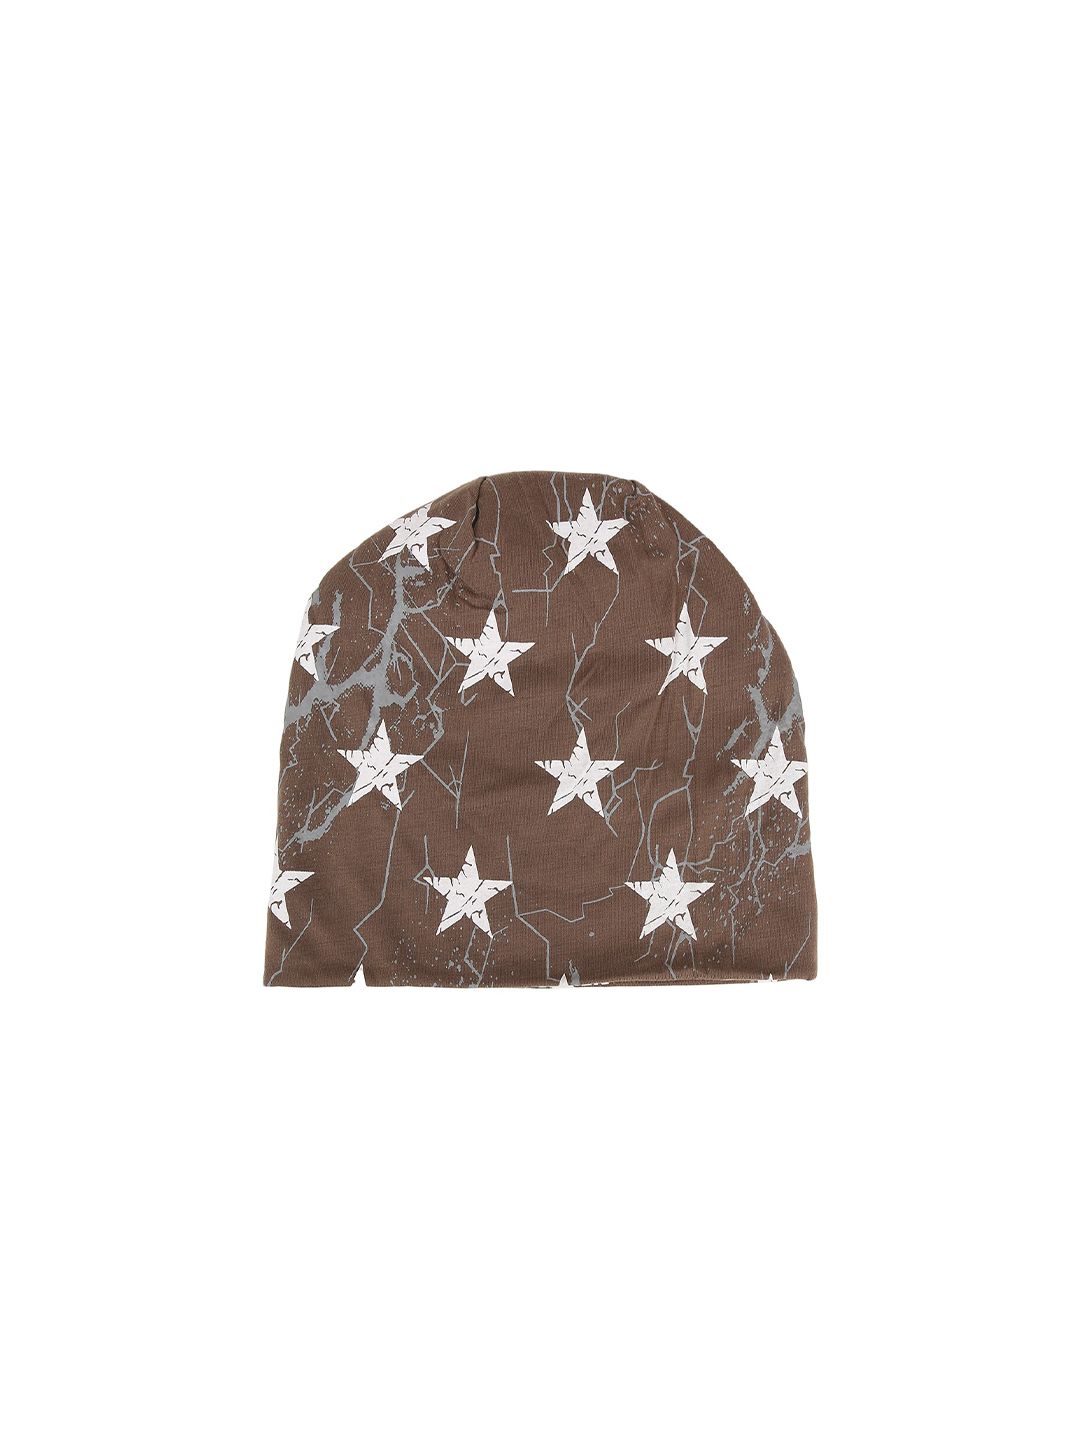 iSWEVEN Unisex Brown & White Cotton Printed Beanie Price in India